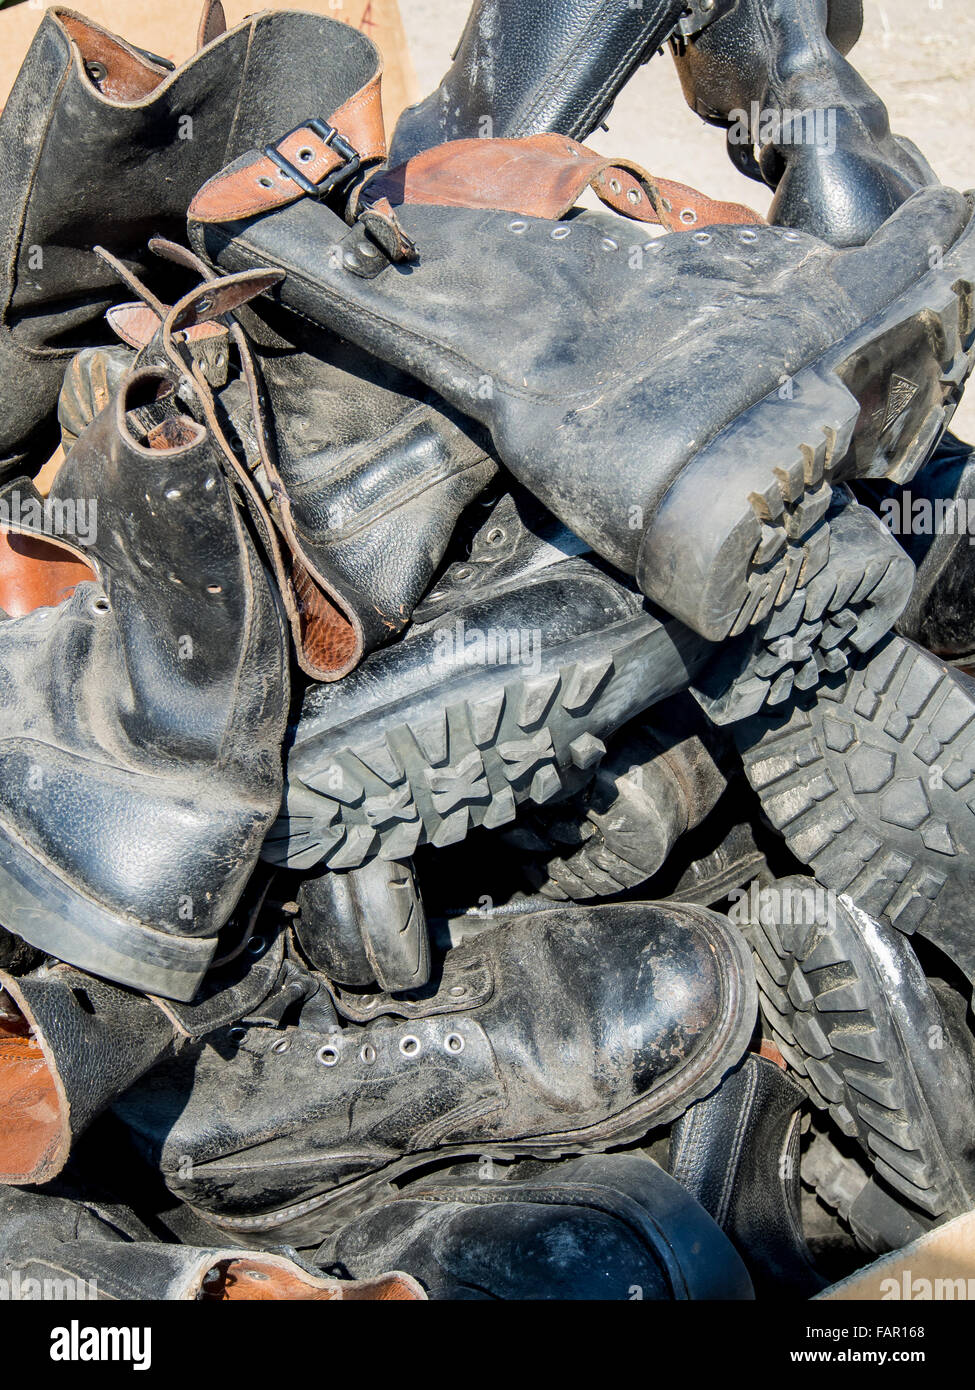 A heap of old leather worn military boots Stock Photo - Alamy